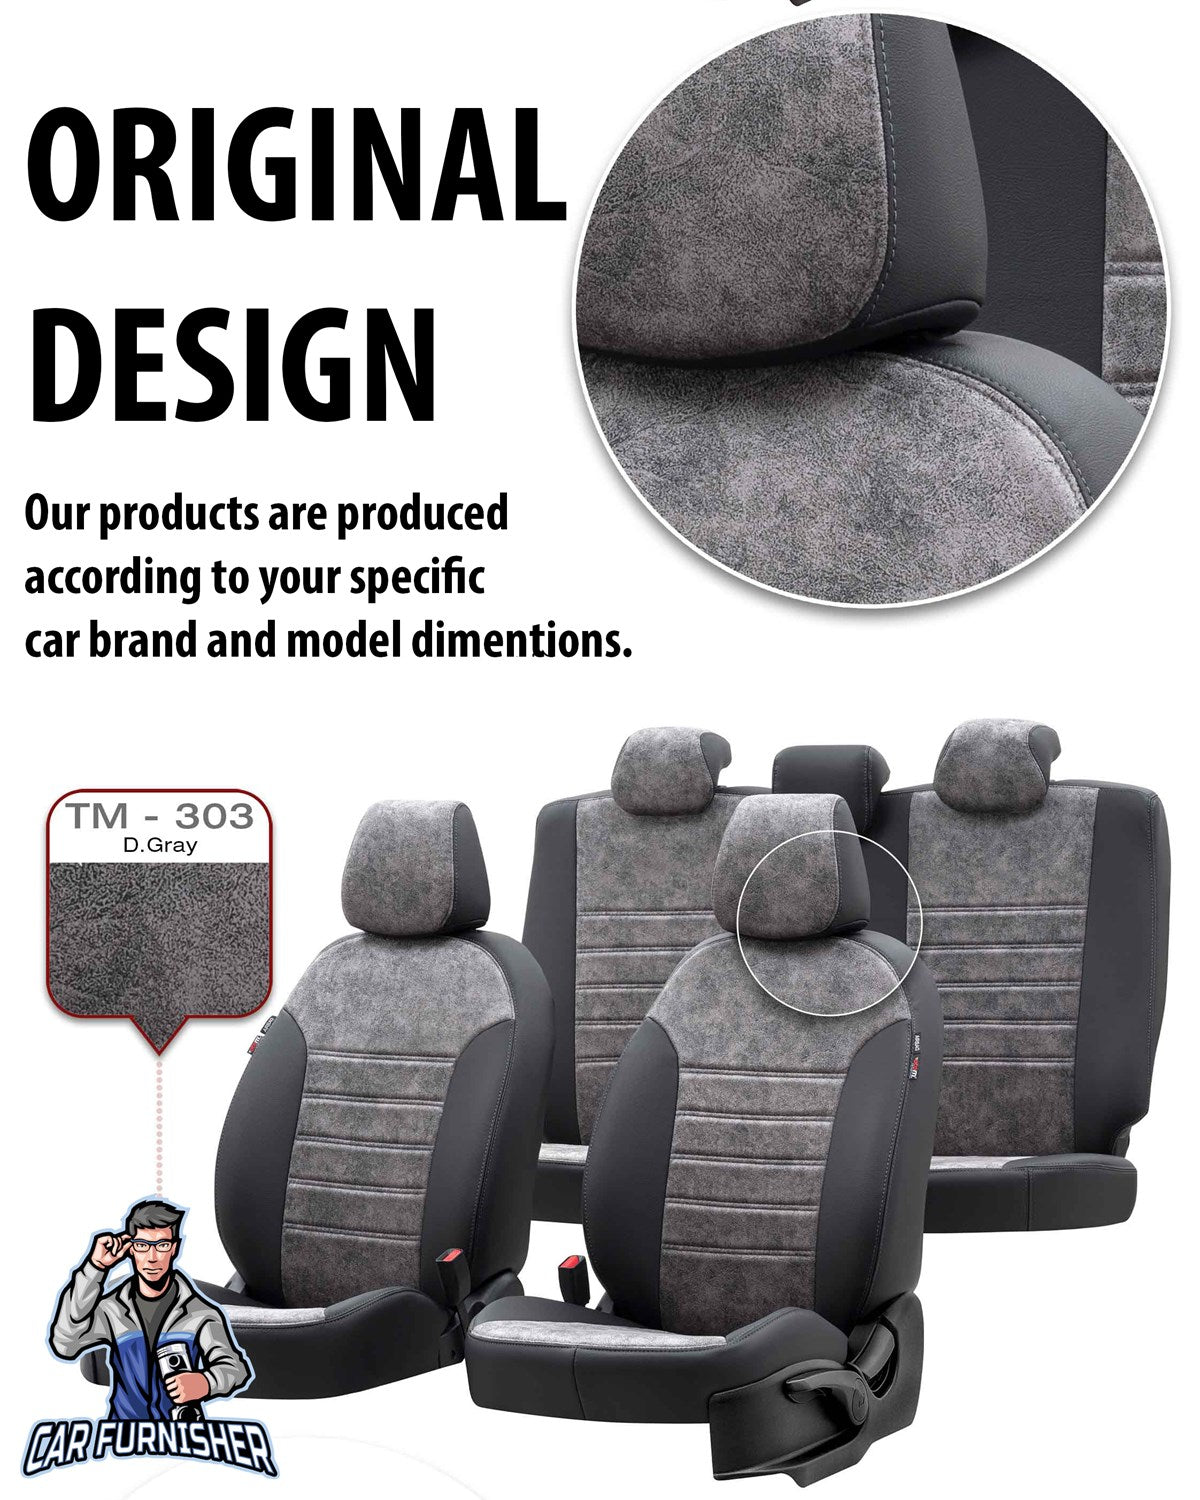 Peugeot 301 Seat Covers Milano Suede Design Burgundy Leather & Suede Fabric